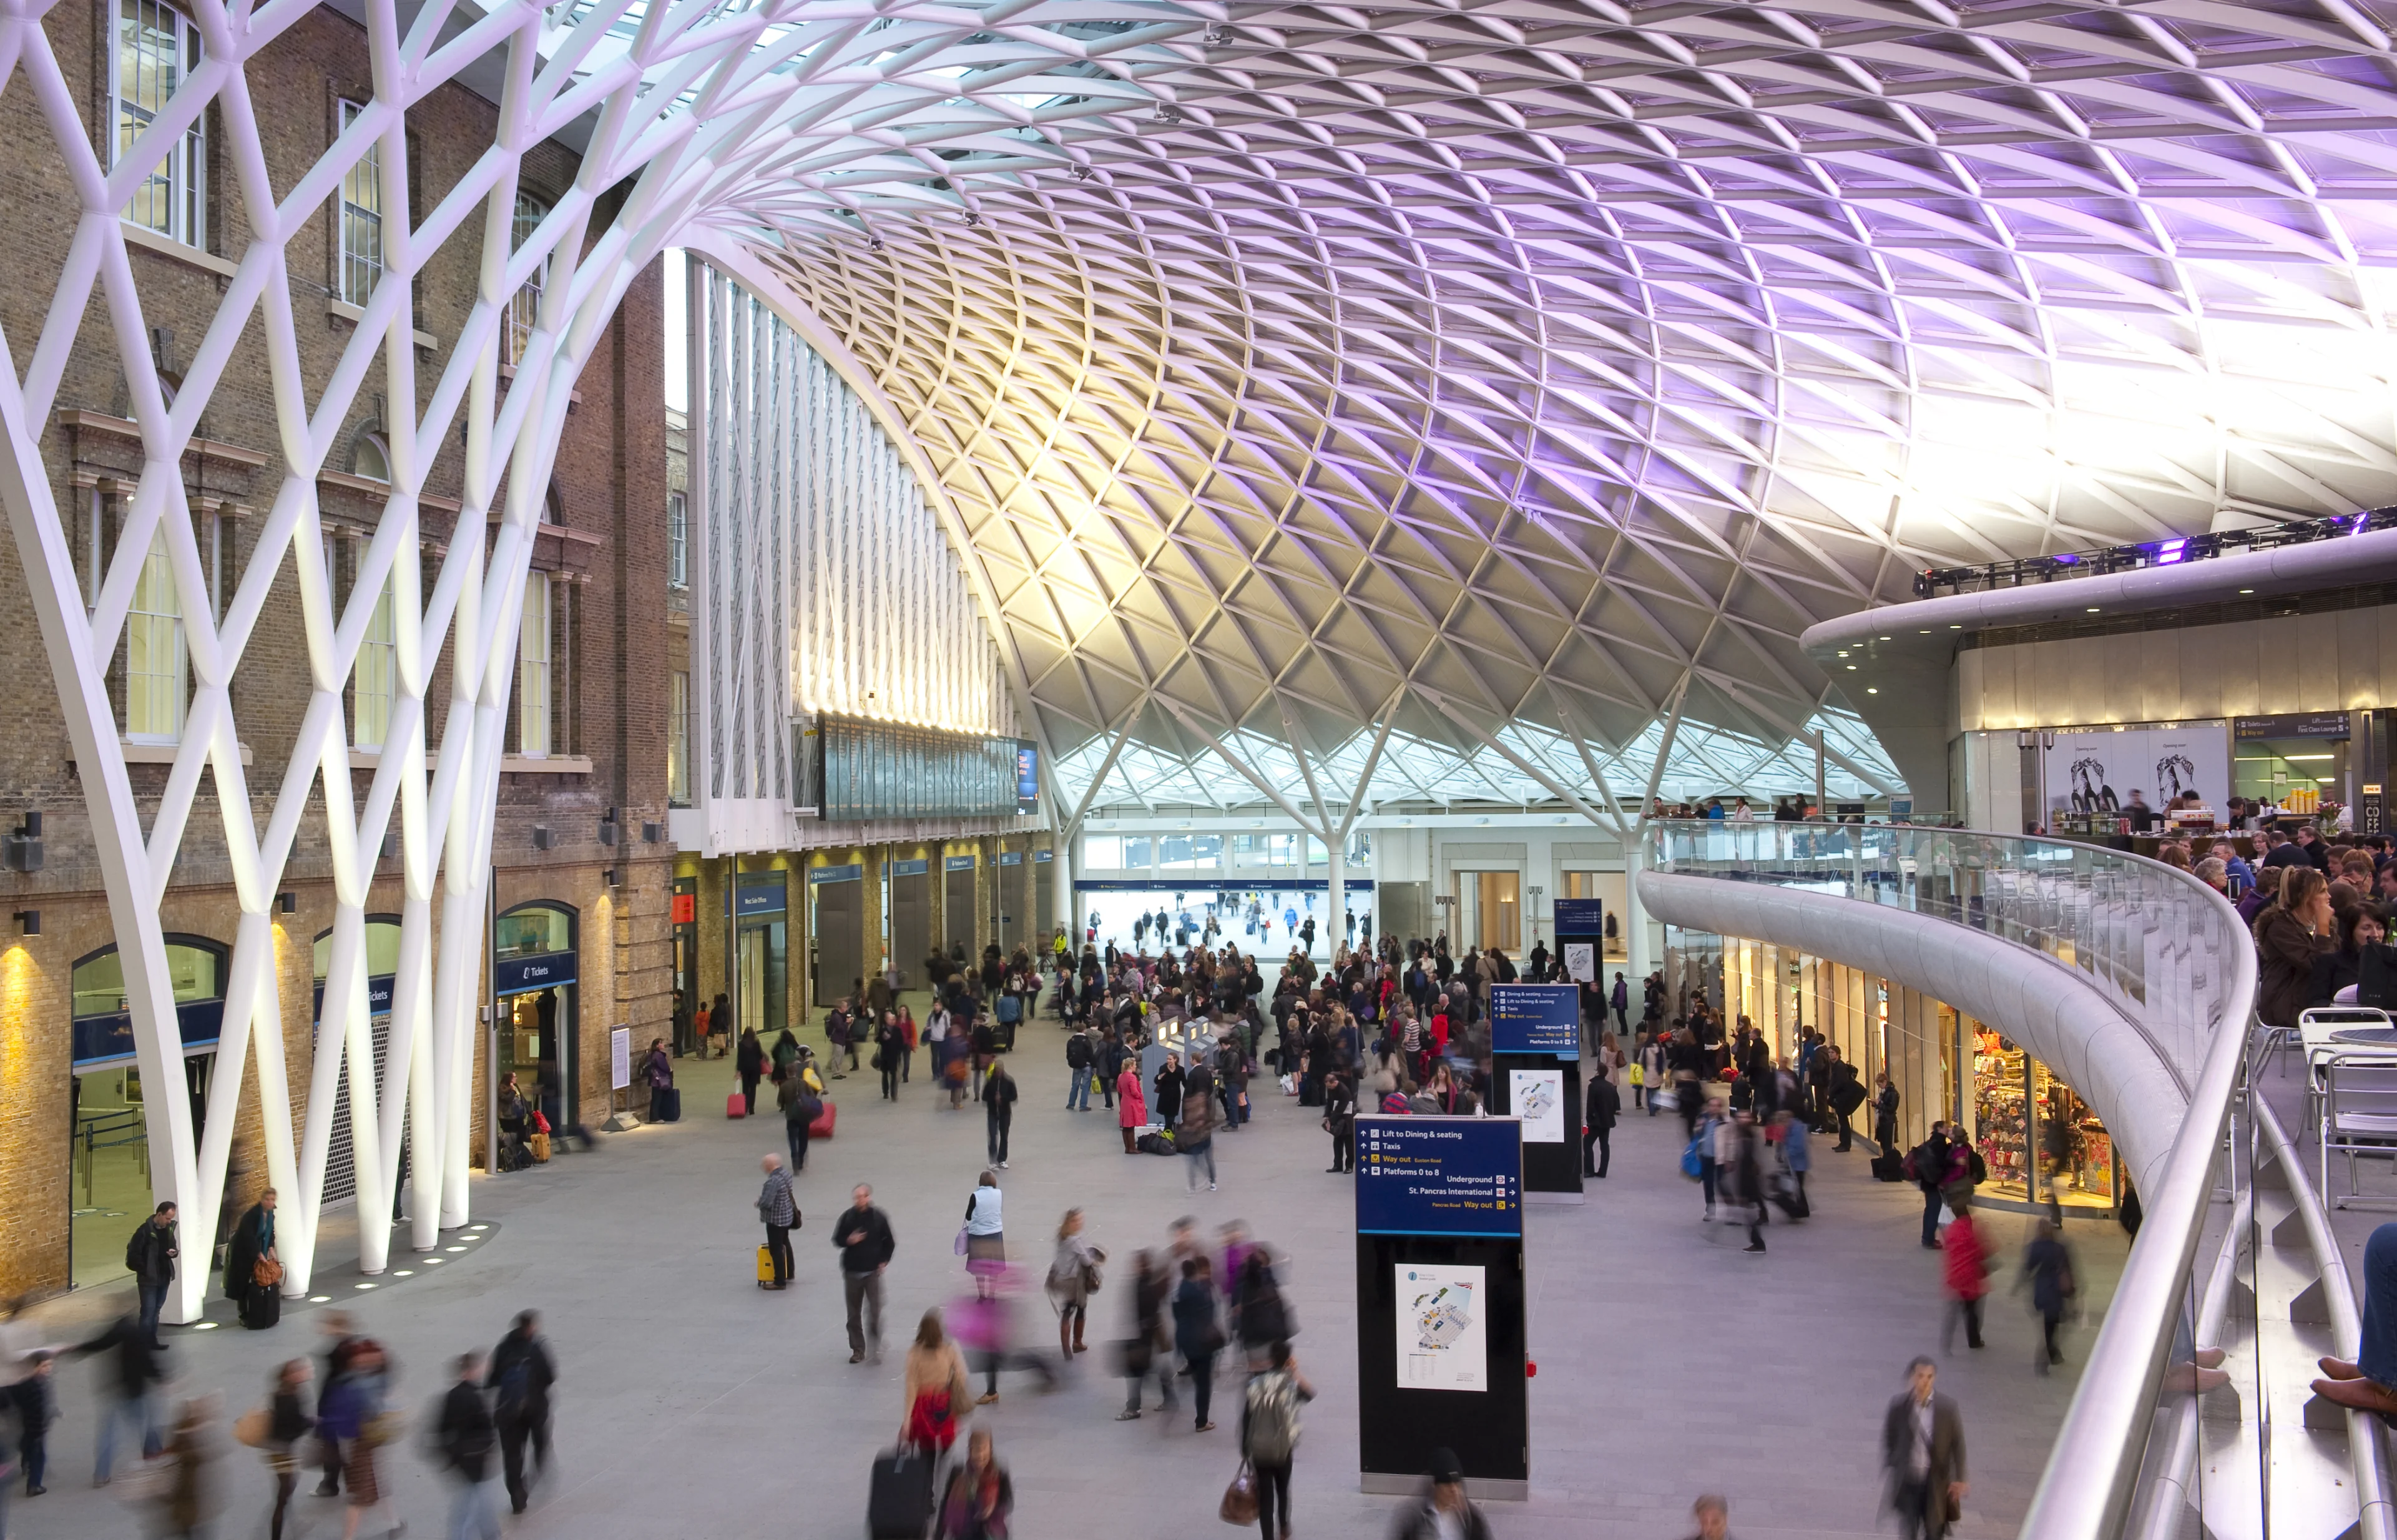 The concourse at Kings Cross station, showing passengers walking at the bottom level and seated on the balcony to the right hand side, with the large domed ceiling visible at the top. 